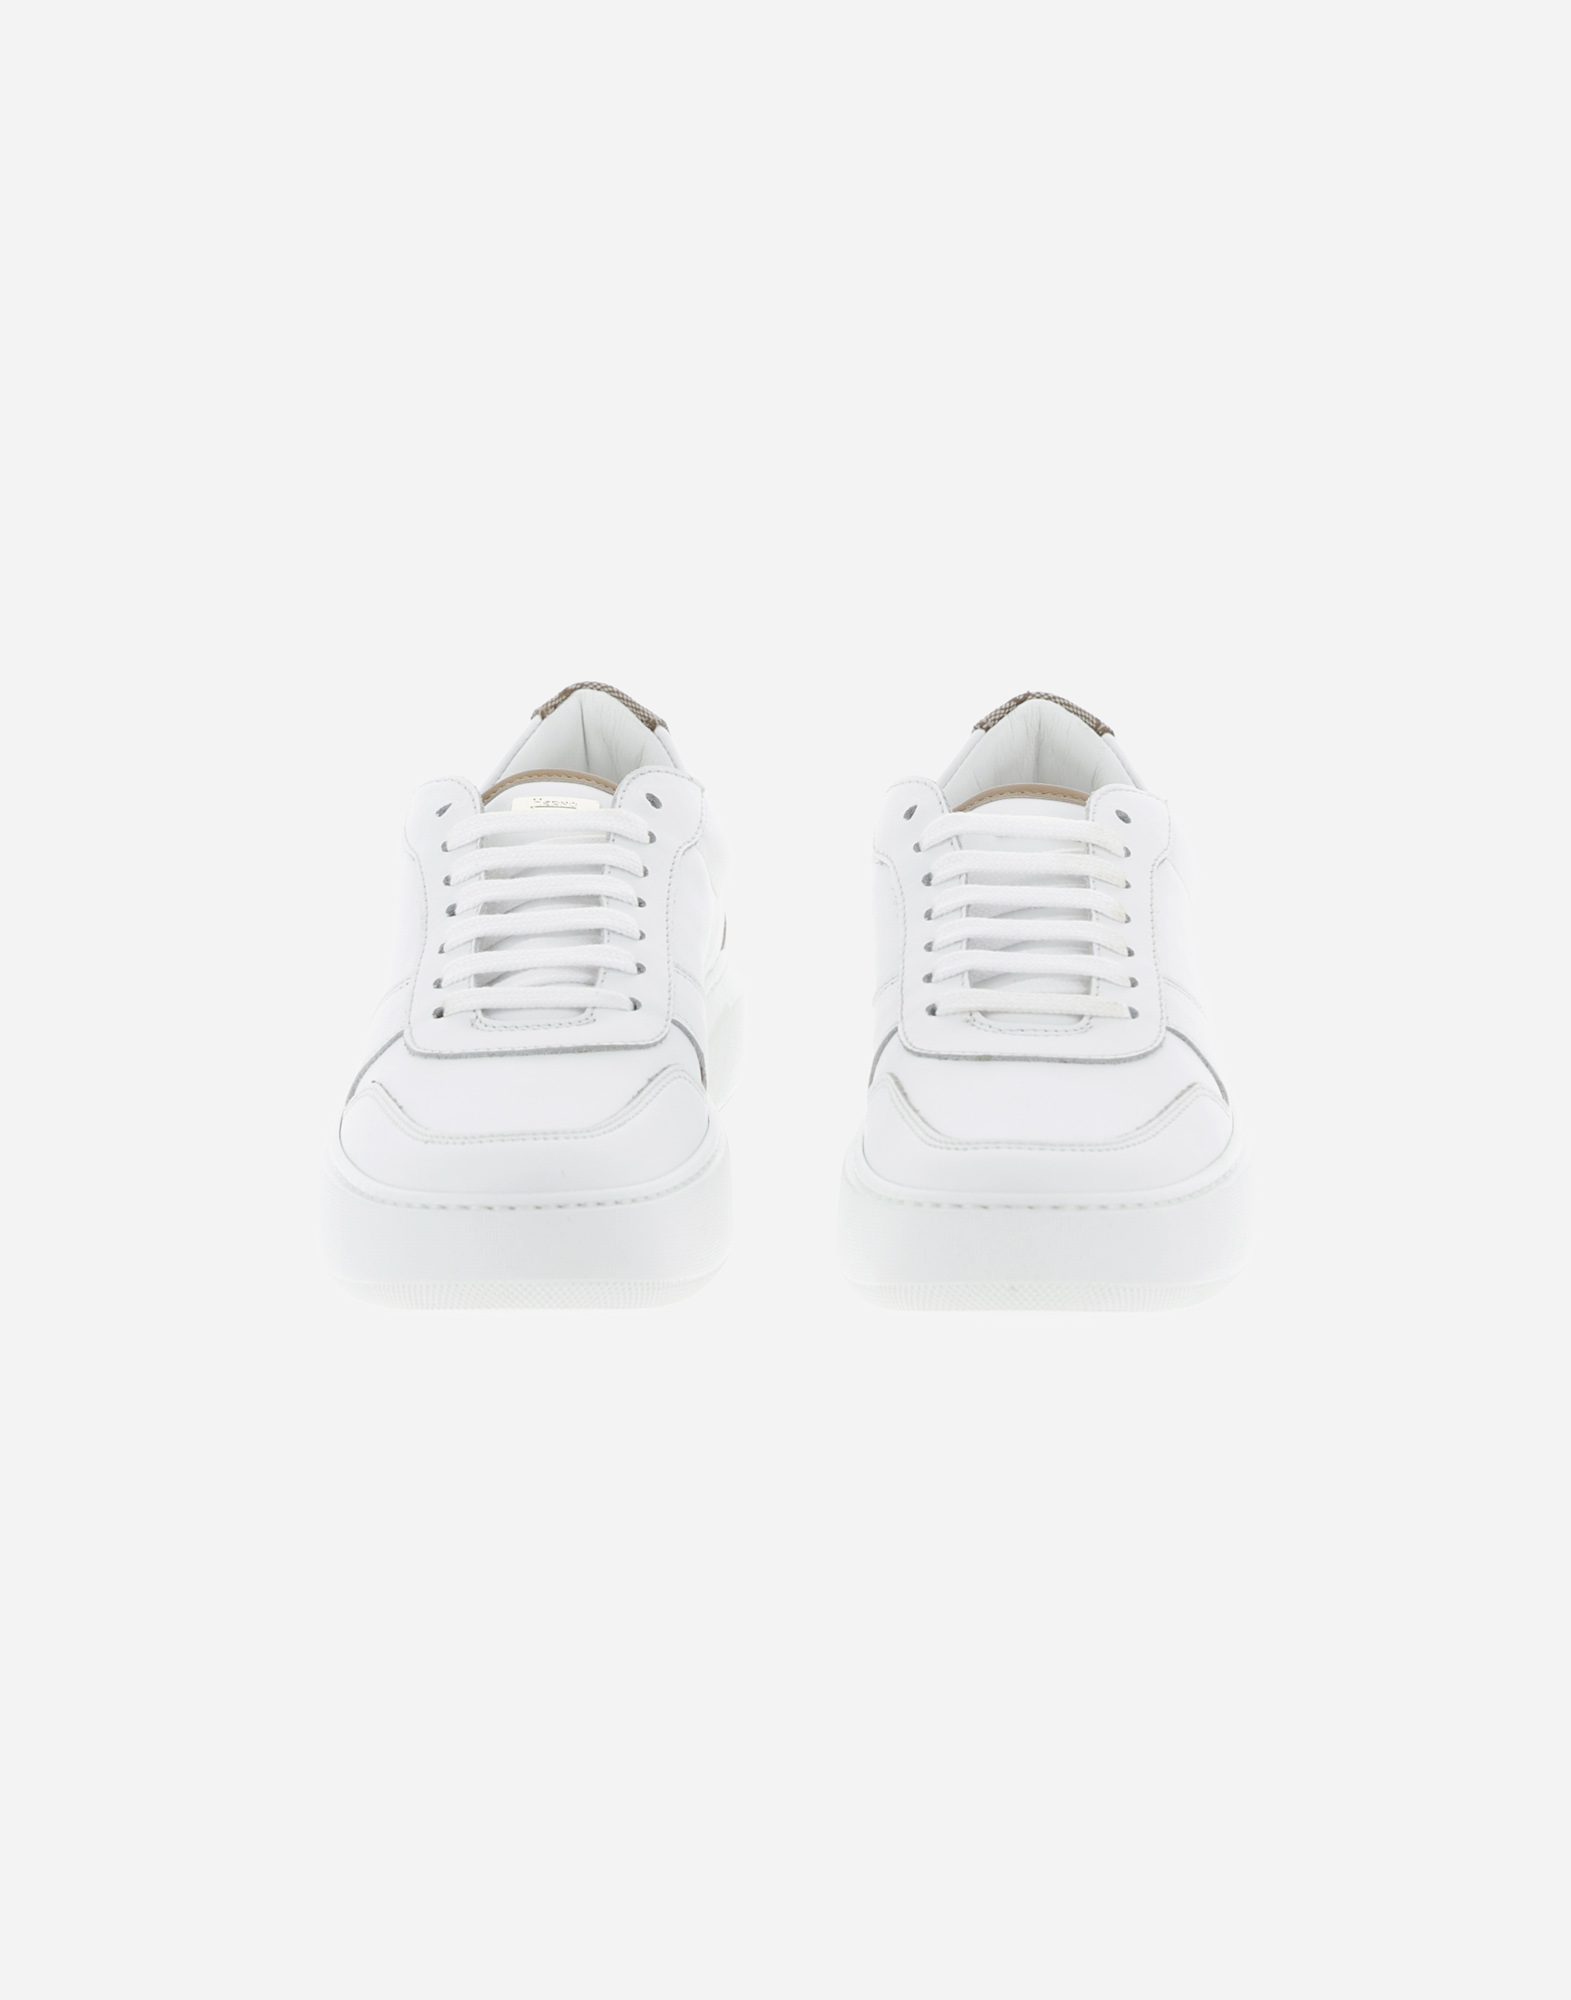 Herno Leather And Monogram Trainers In White/beige